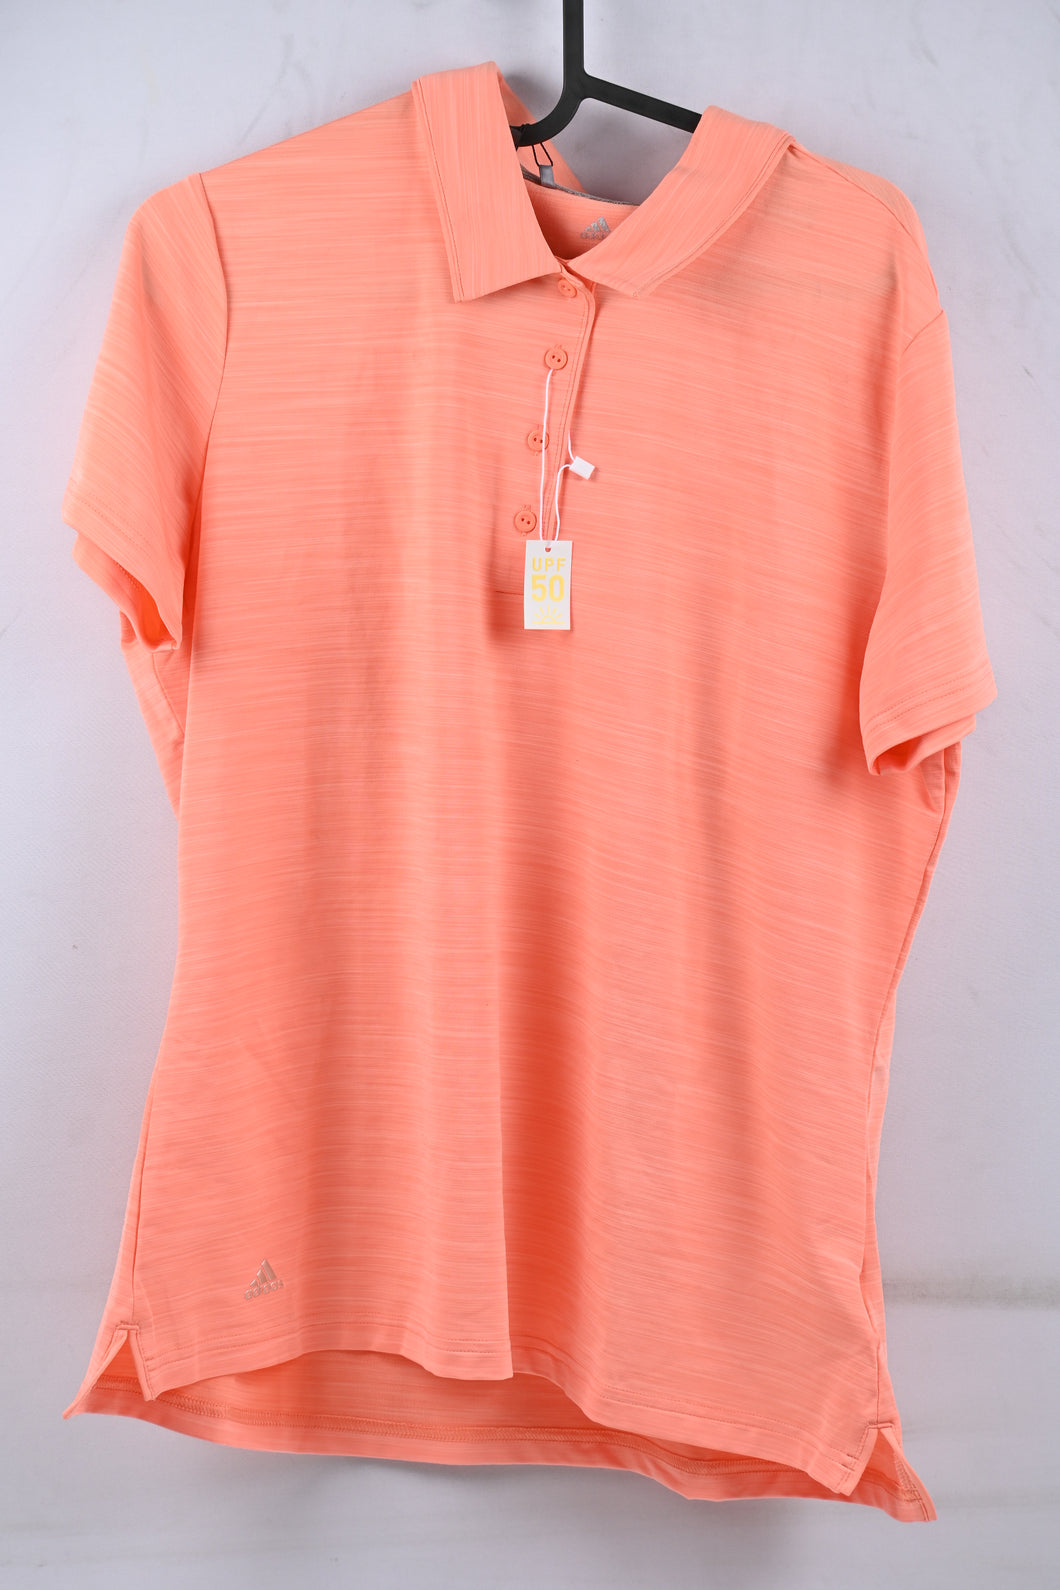 Adidas Ladies Ultimate 365 Polo Shirt / Chalk Coral Heather / Small